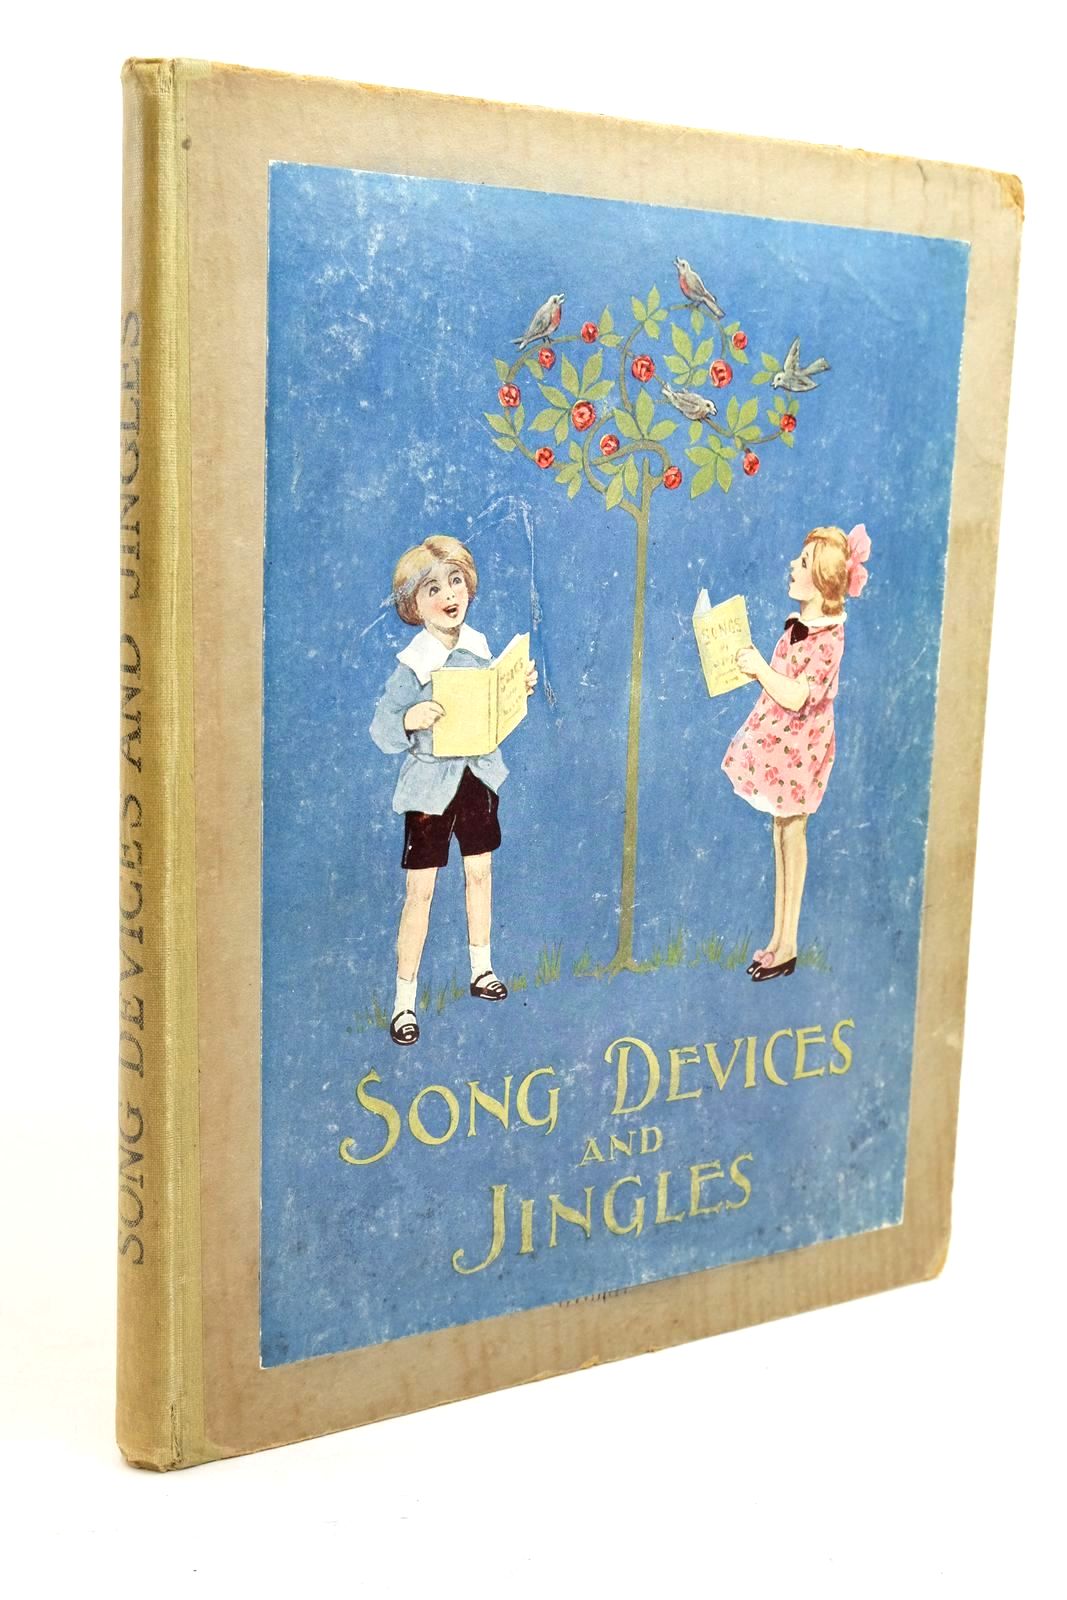 Photo of SONG DEVICES AND JINGLES written by Smith, Eleanor illustrated by Young, Florence Pearse, S.B. Nixon, Kathleen published by Waverley Book Company Ltd. (STOCK CODE: 1321165)  for sale by Stella & Rose's Books